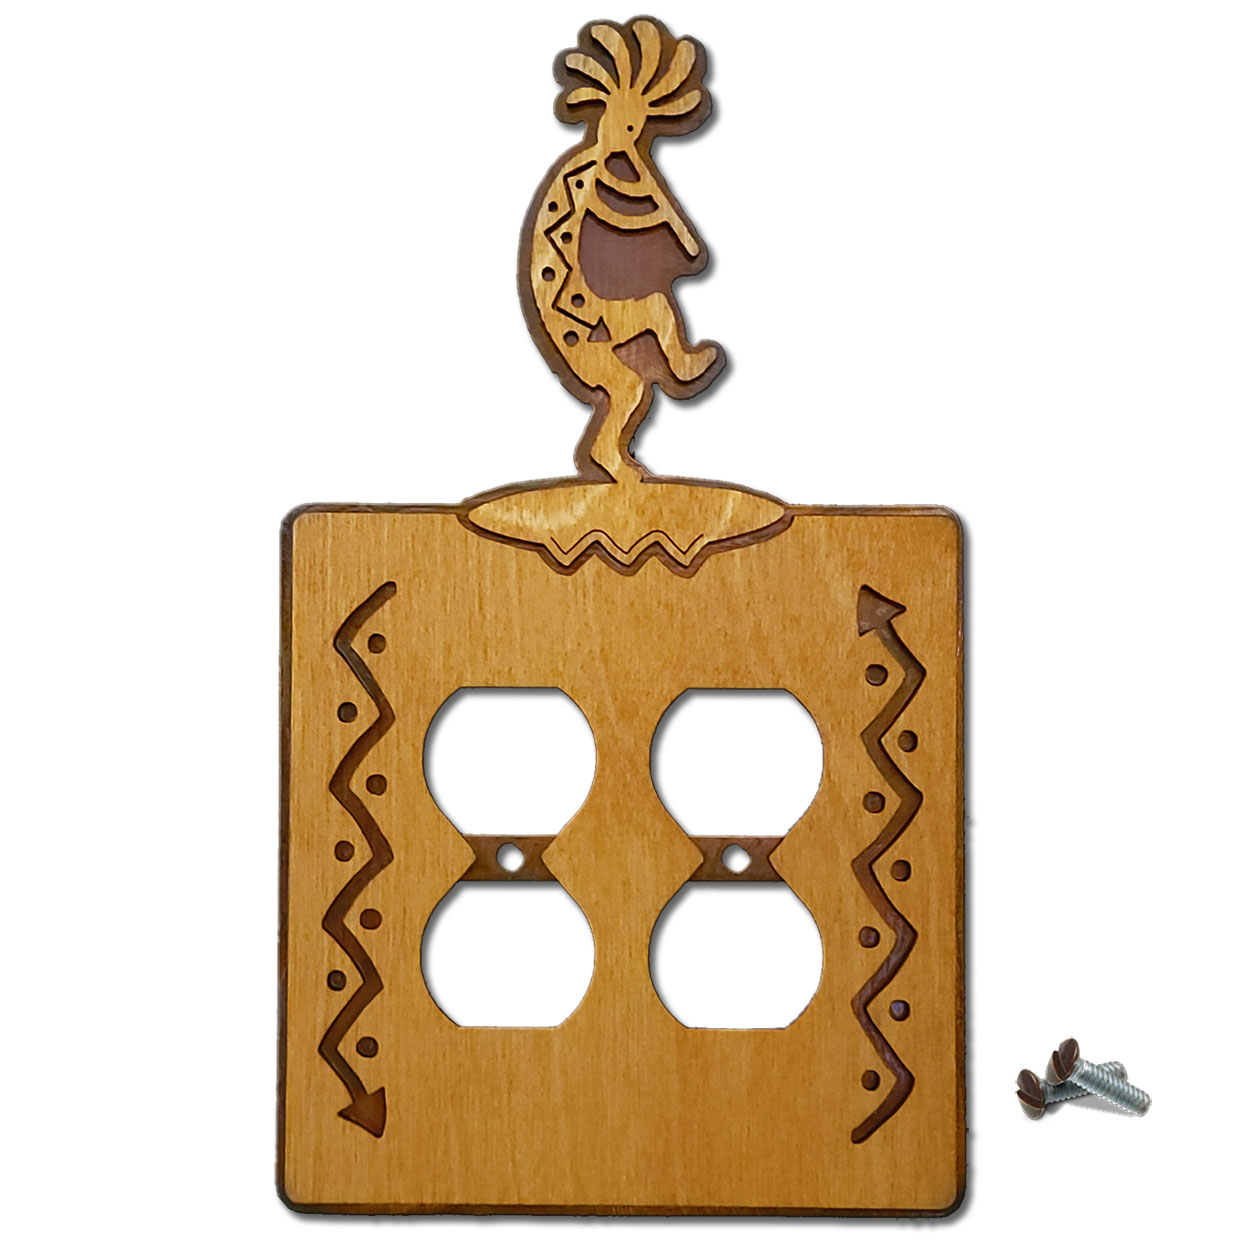 167625 -  Dancing Kokopelli Southwestern Decor Double Outlet Cover in Golden Sienna